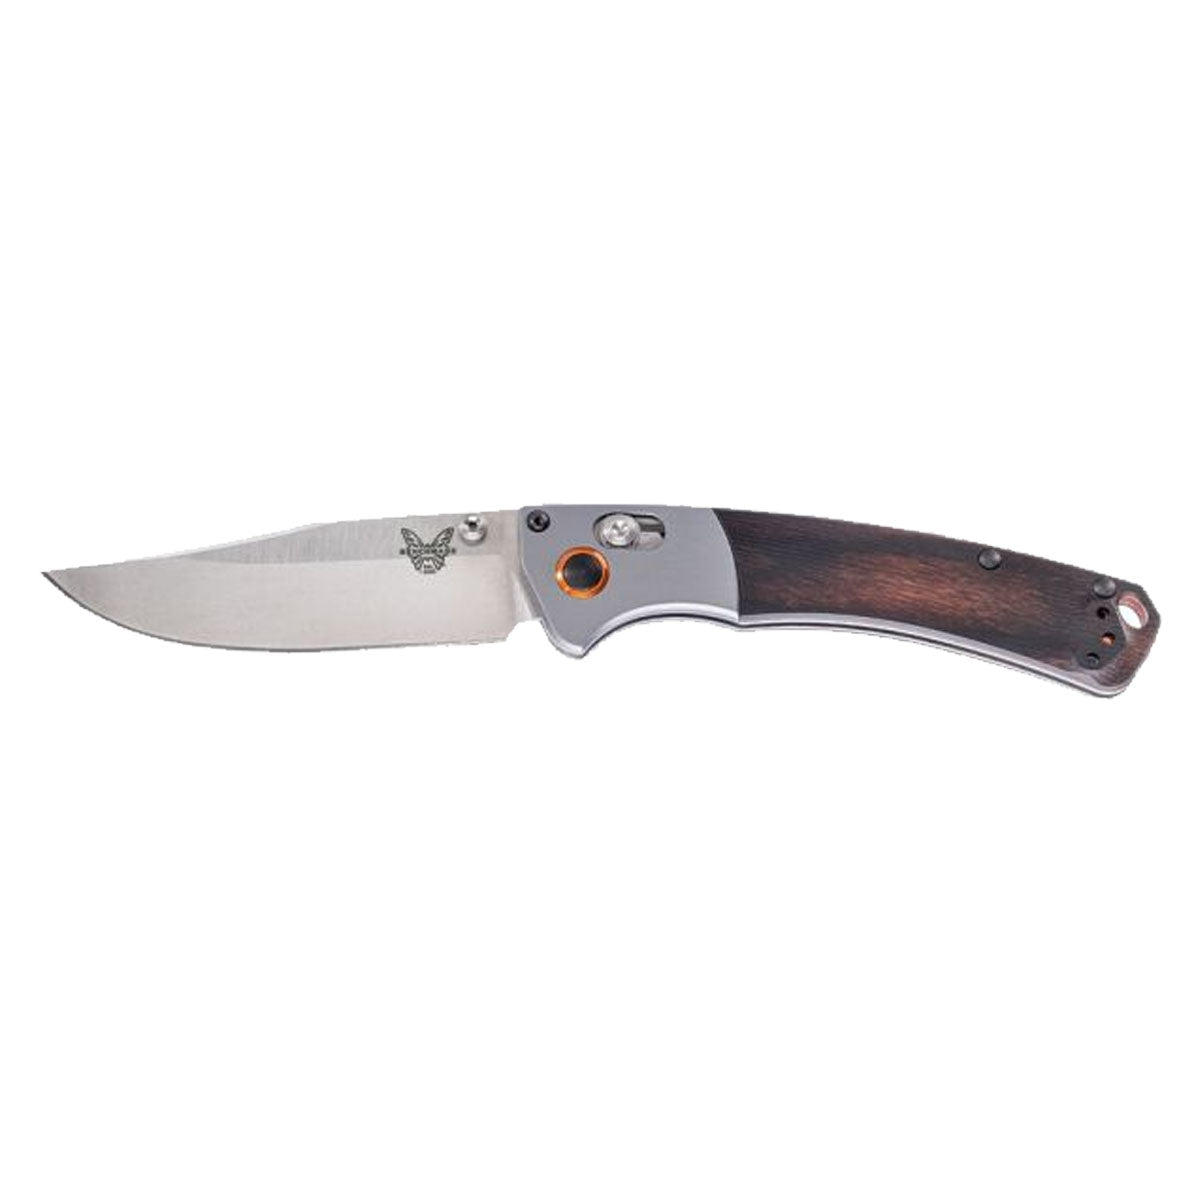 Benchmade Mini Crooked River in  by GOHUNT | Benchmade - GOHUNT Shop